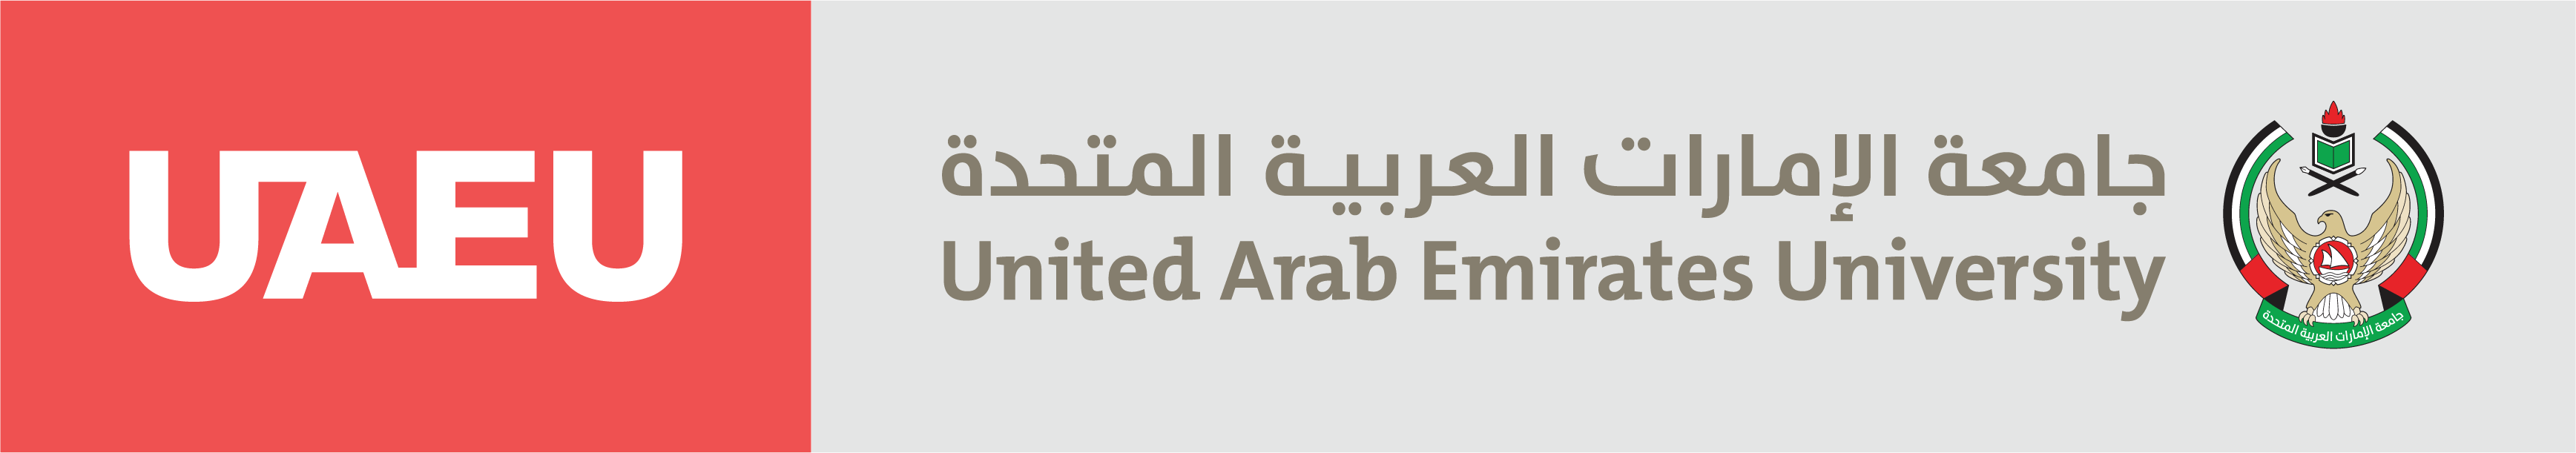 Let us know your opinion on the People of Determination Services at United Arab Emirates University